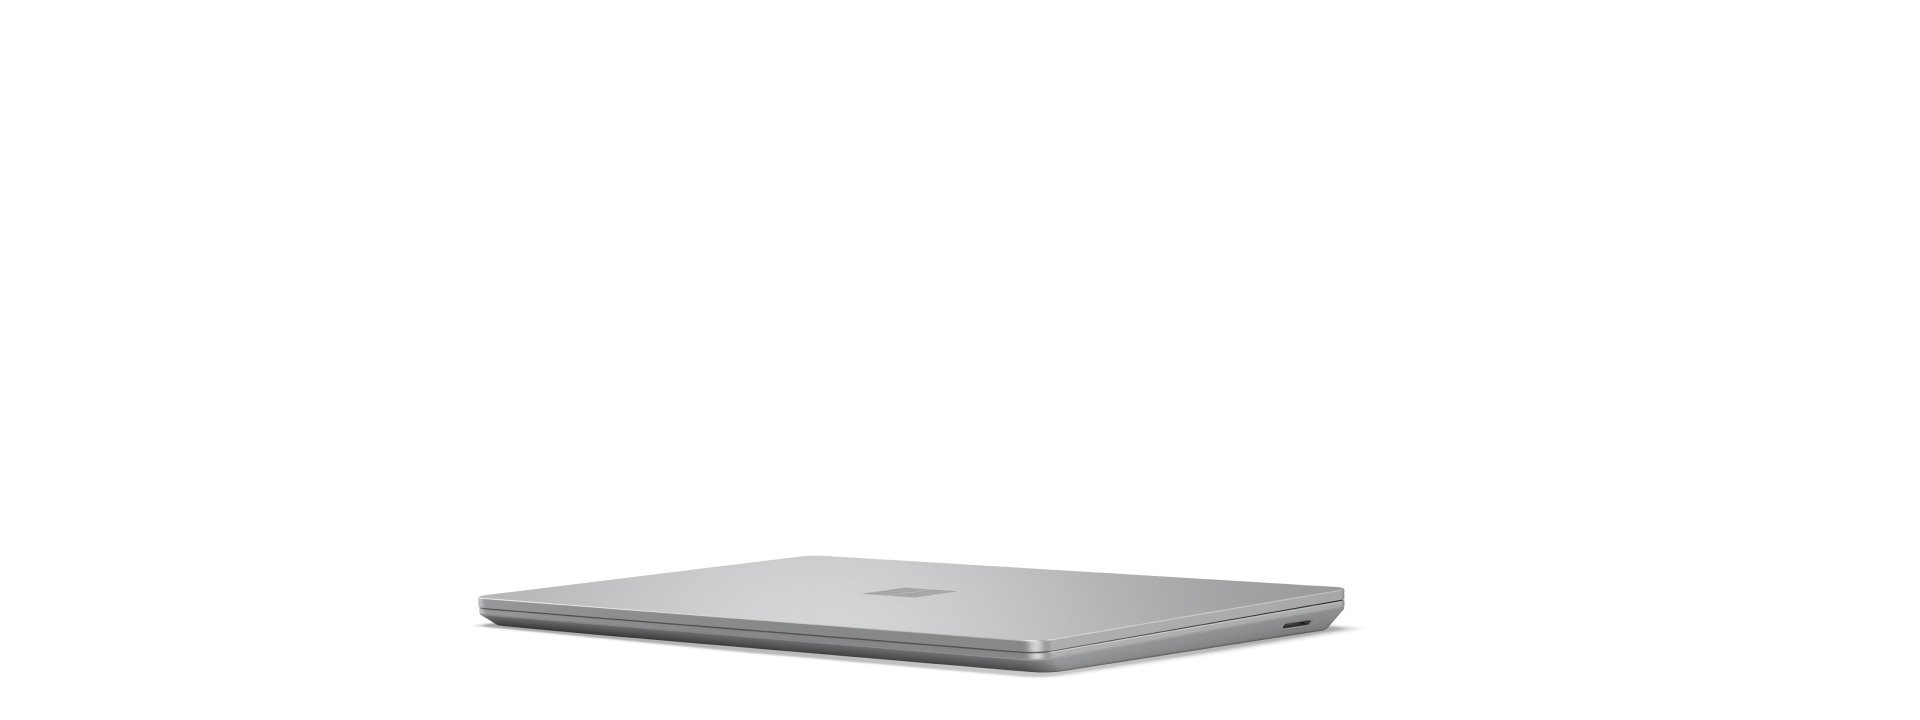 Starting frame for rotating Surface Laptop Go 3 opening and closing while showing all angles of the device.